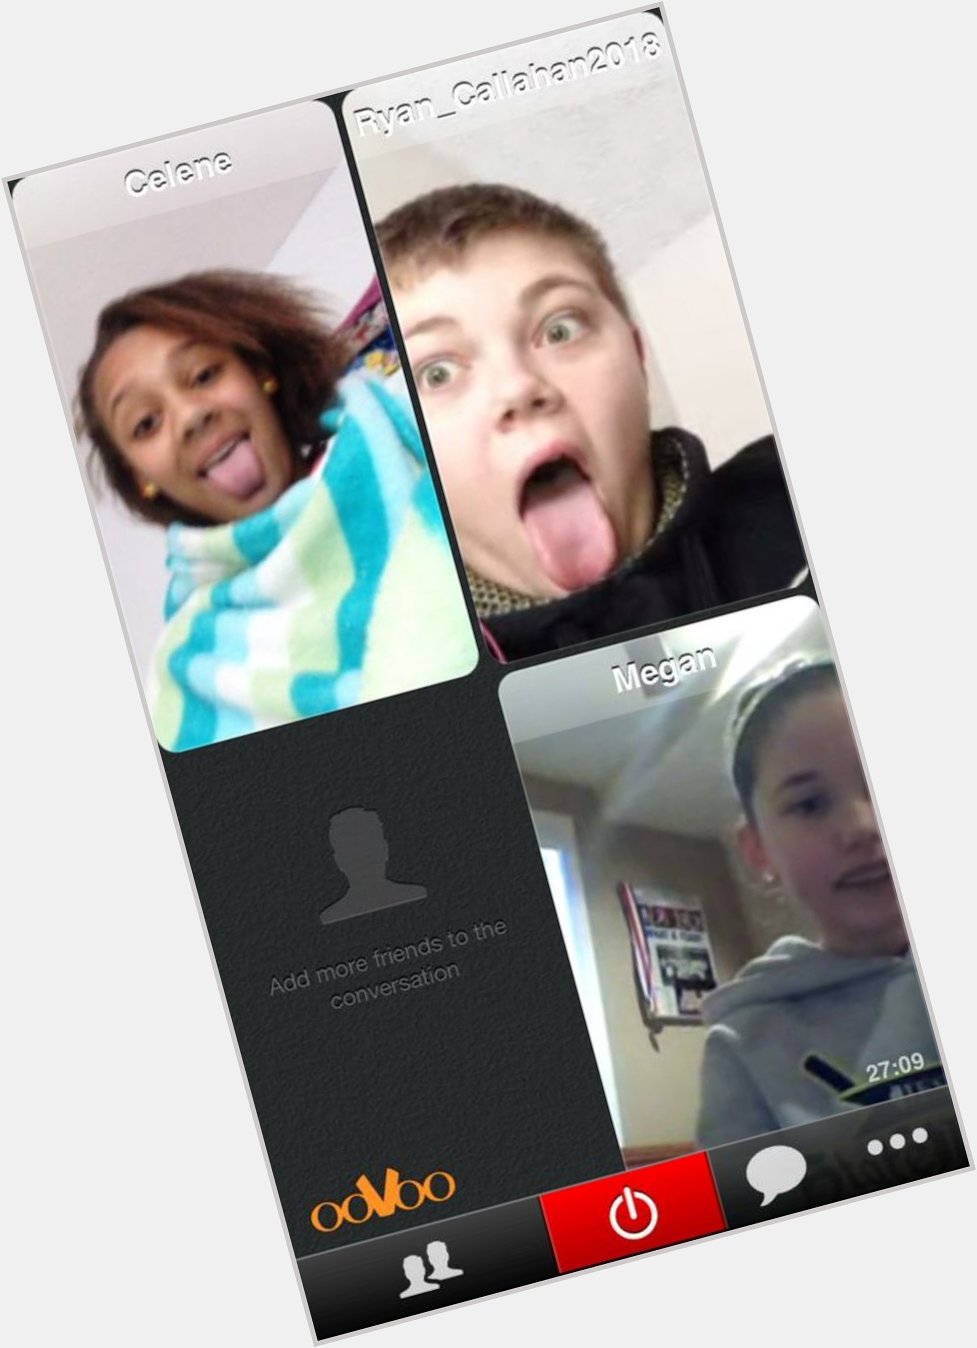 Happy birthday !! I miss oovooing you 24/7   